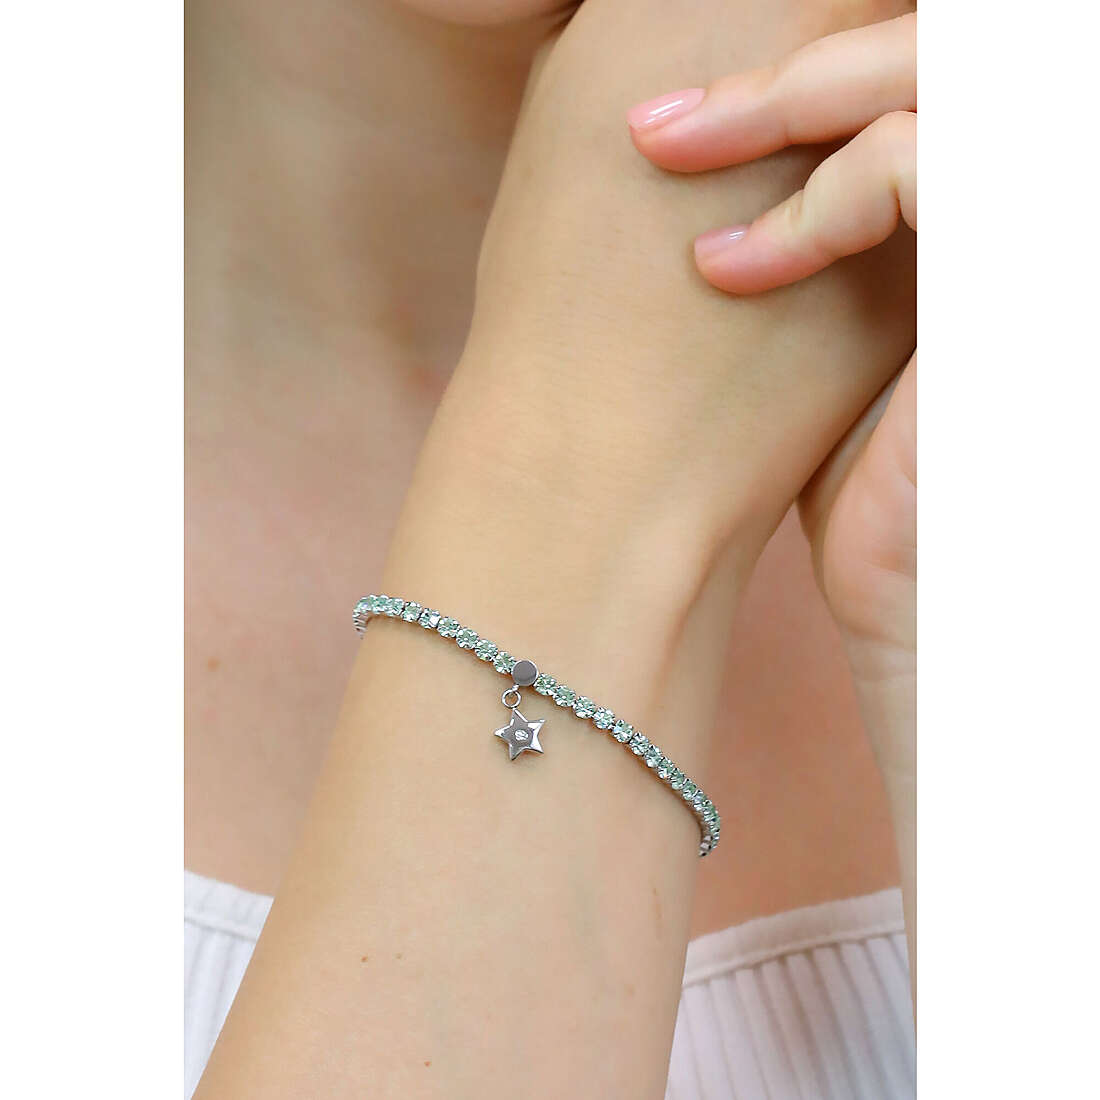 2Jewels Armbanden Youcolors frau 232396 Ich trage